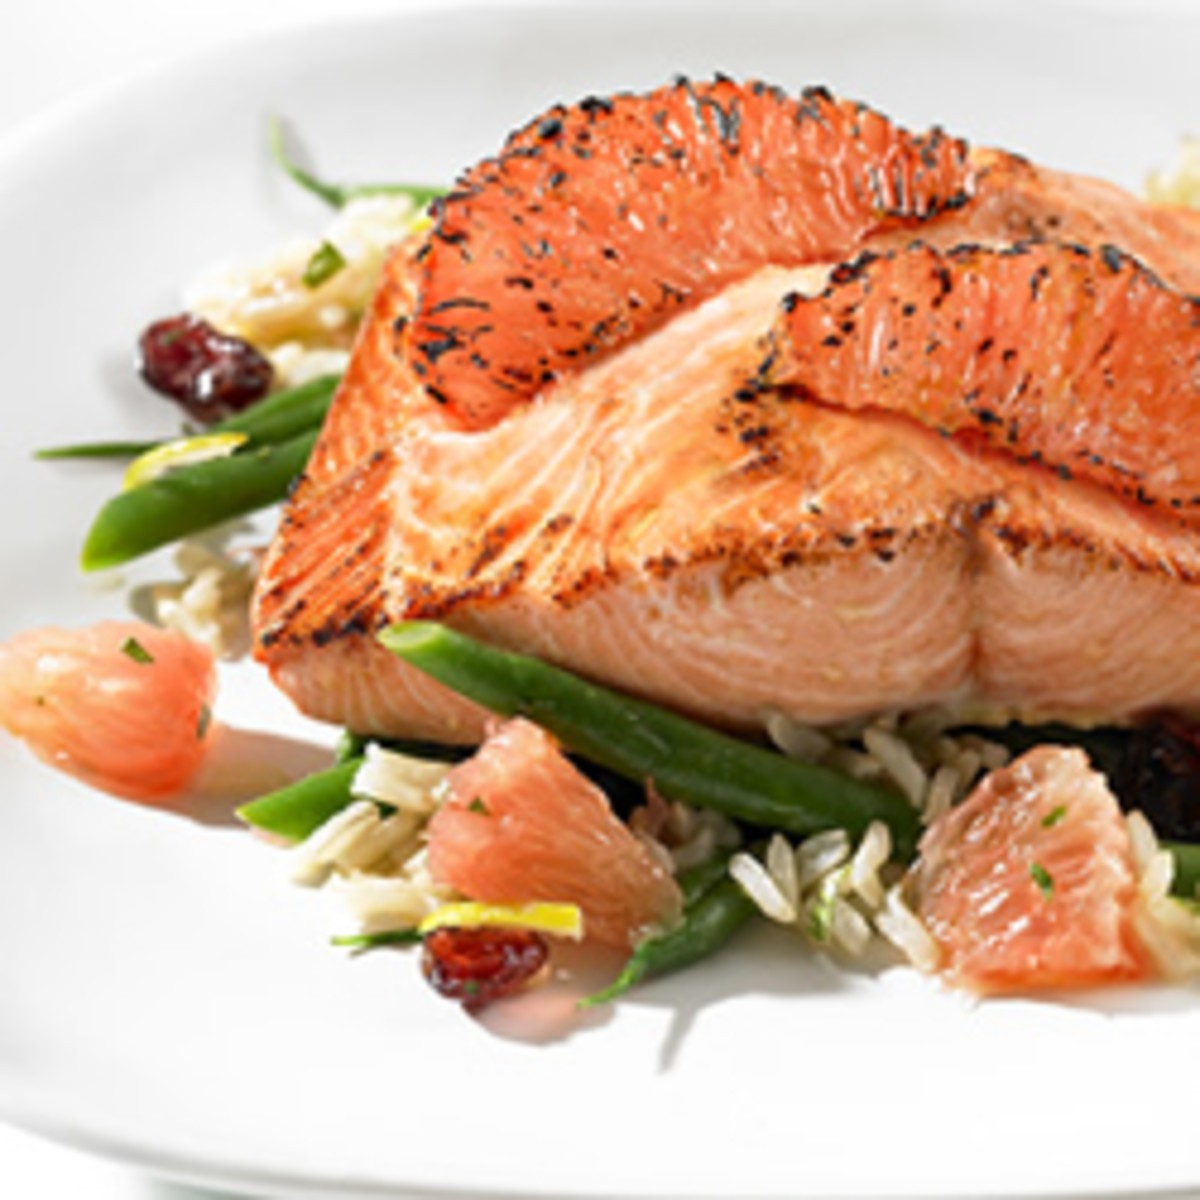 Sugar-crusted Salmon with Florida Grapefruit and French Green Bean Salad